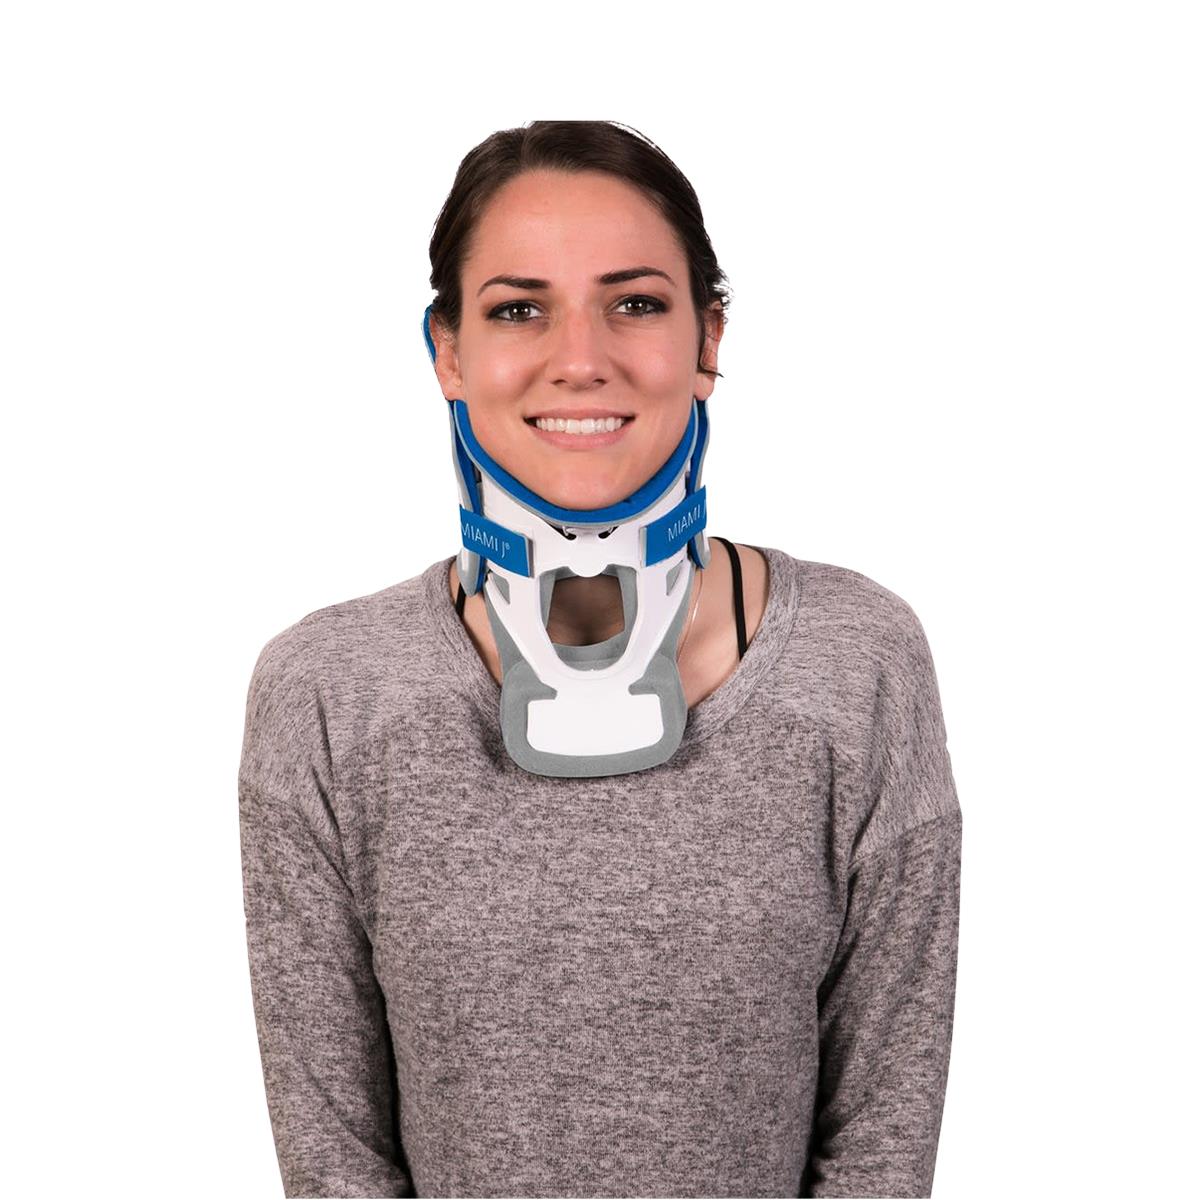 Ossur Miami J Collar Replacement Pads for The Miami J Cervical Neck Brace